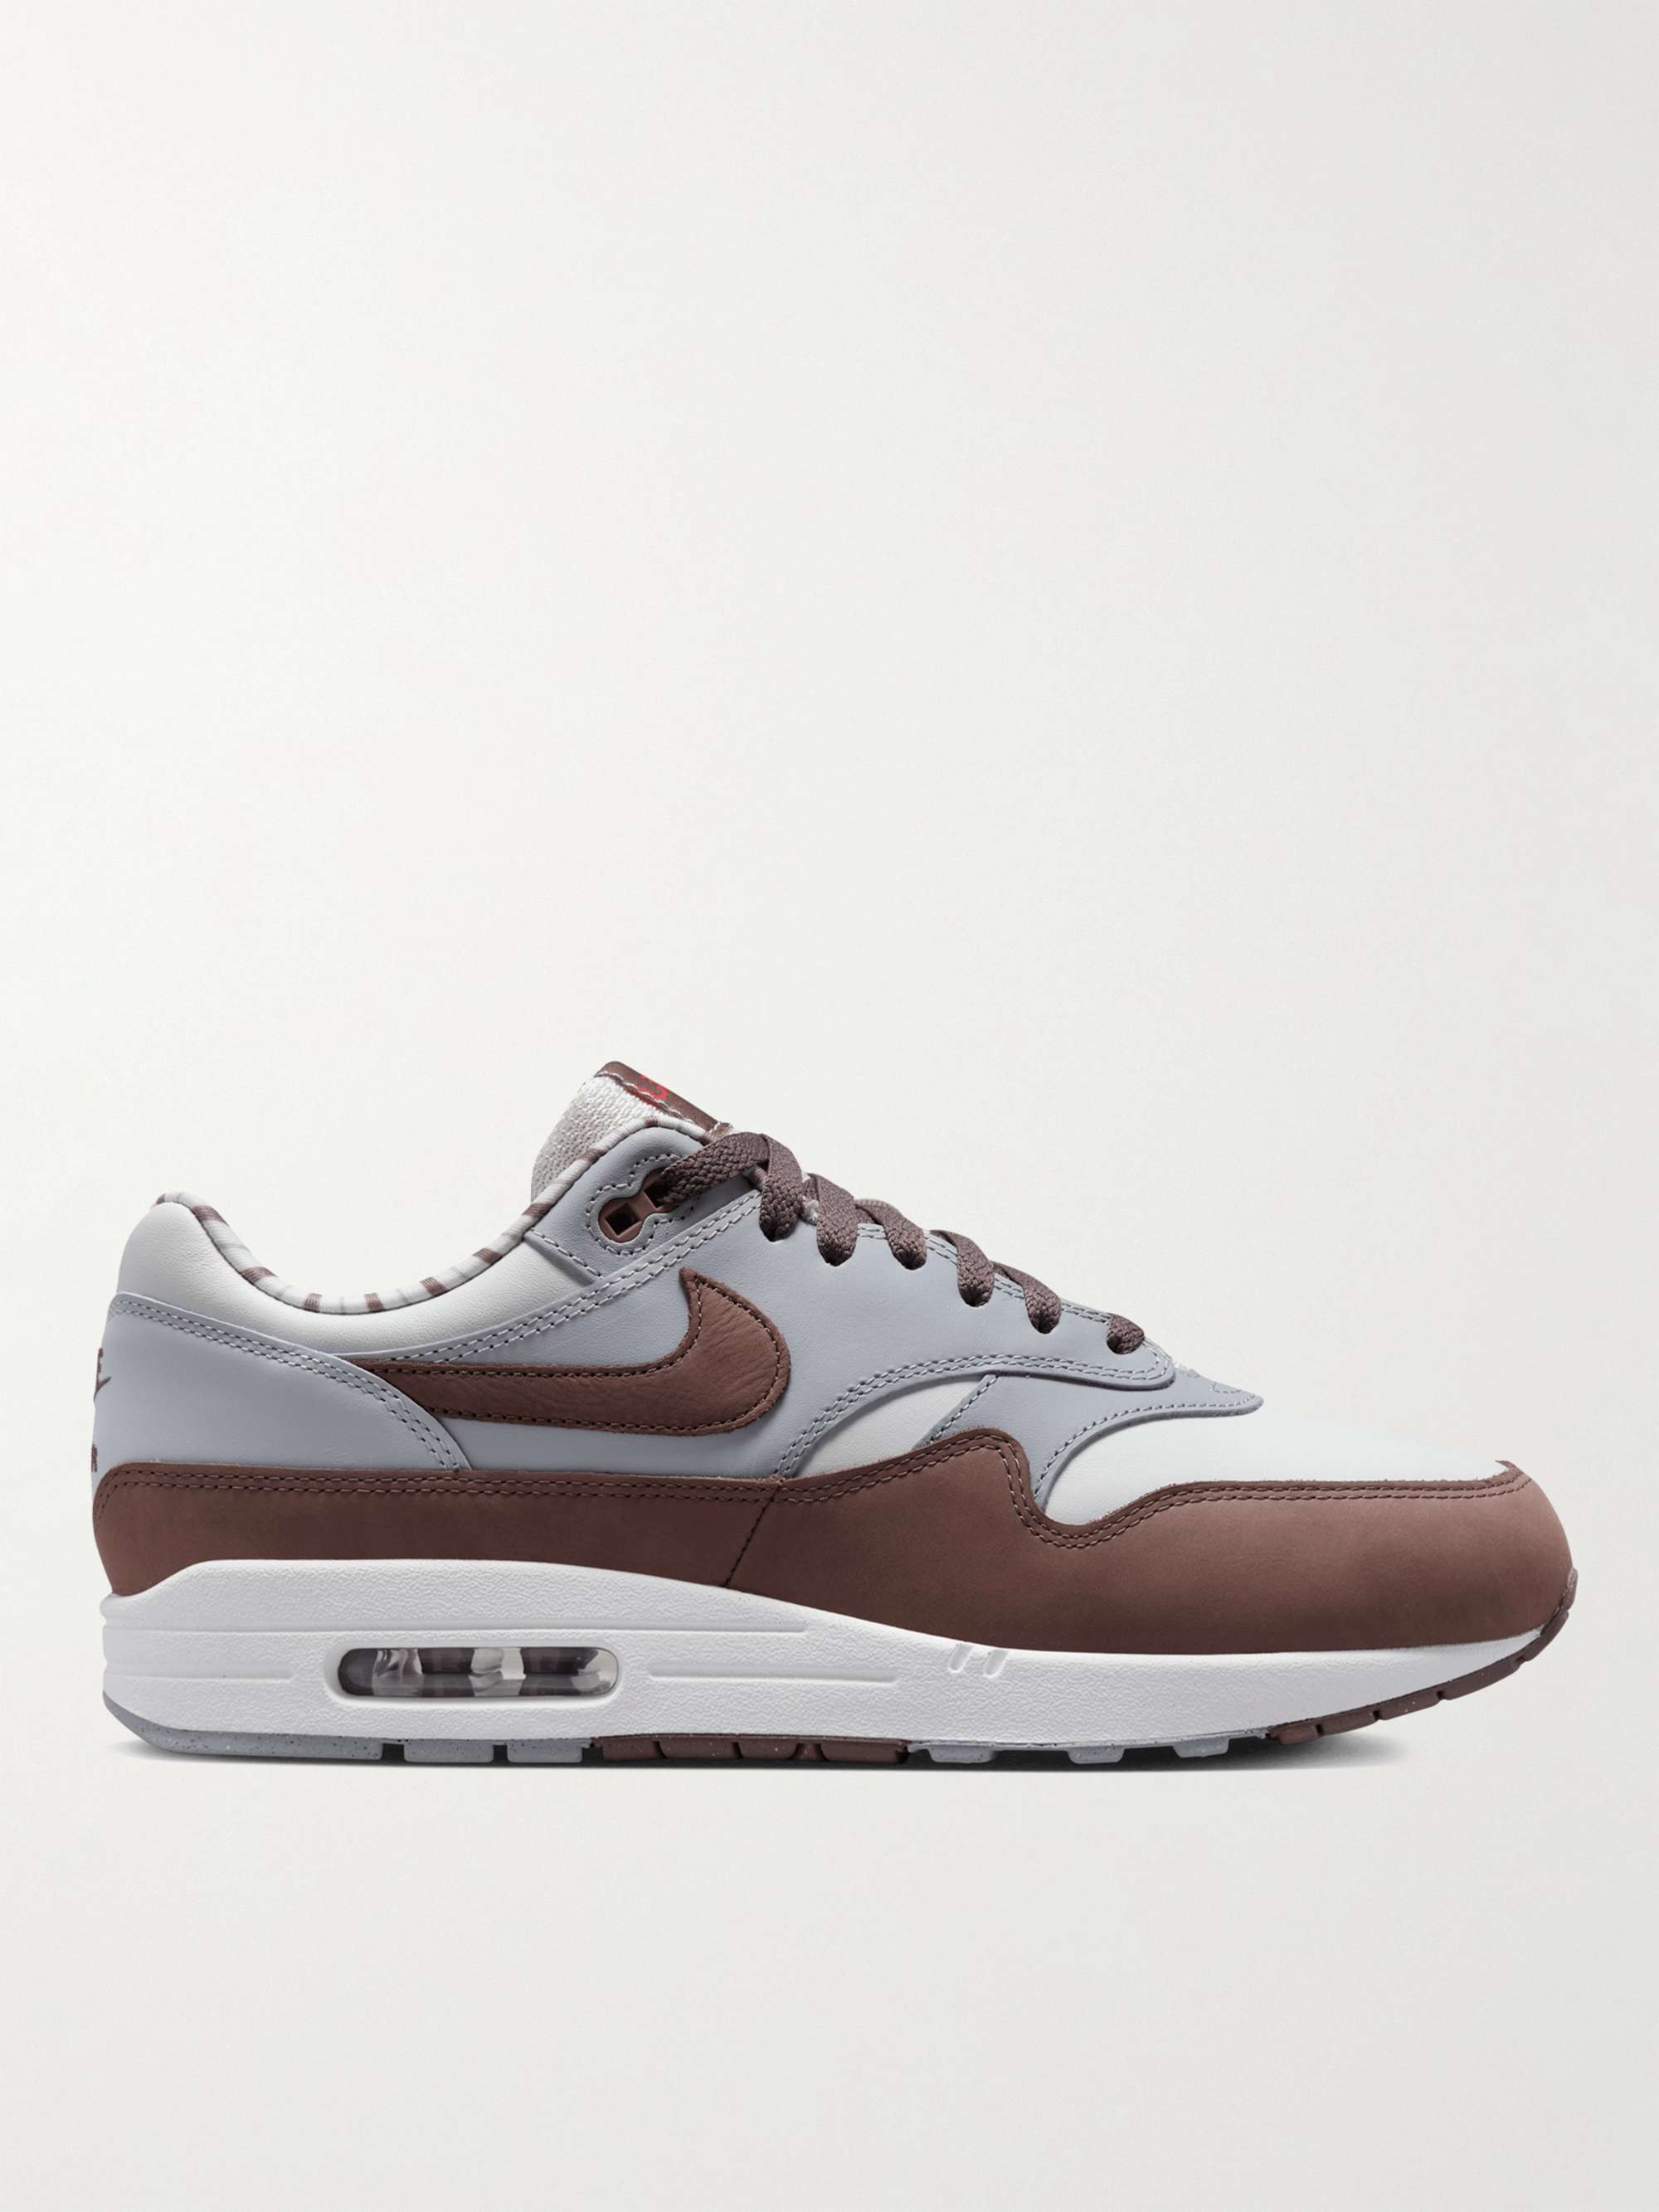 NIKE Air Max 1 Leather Sneakers | MR PORTER